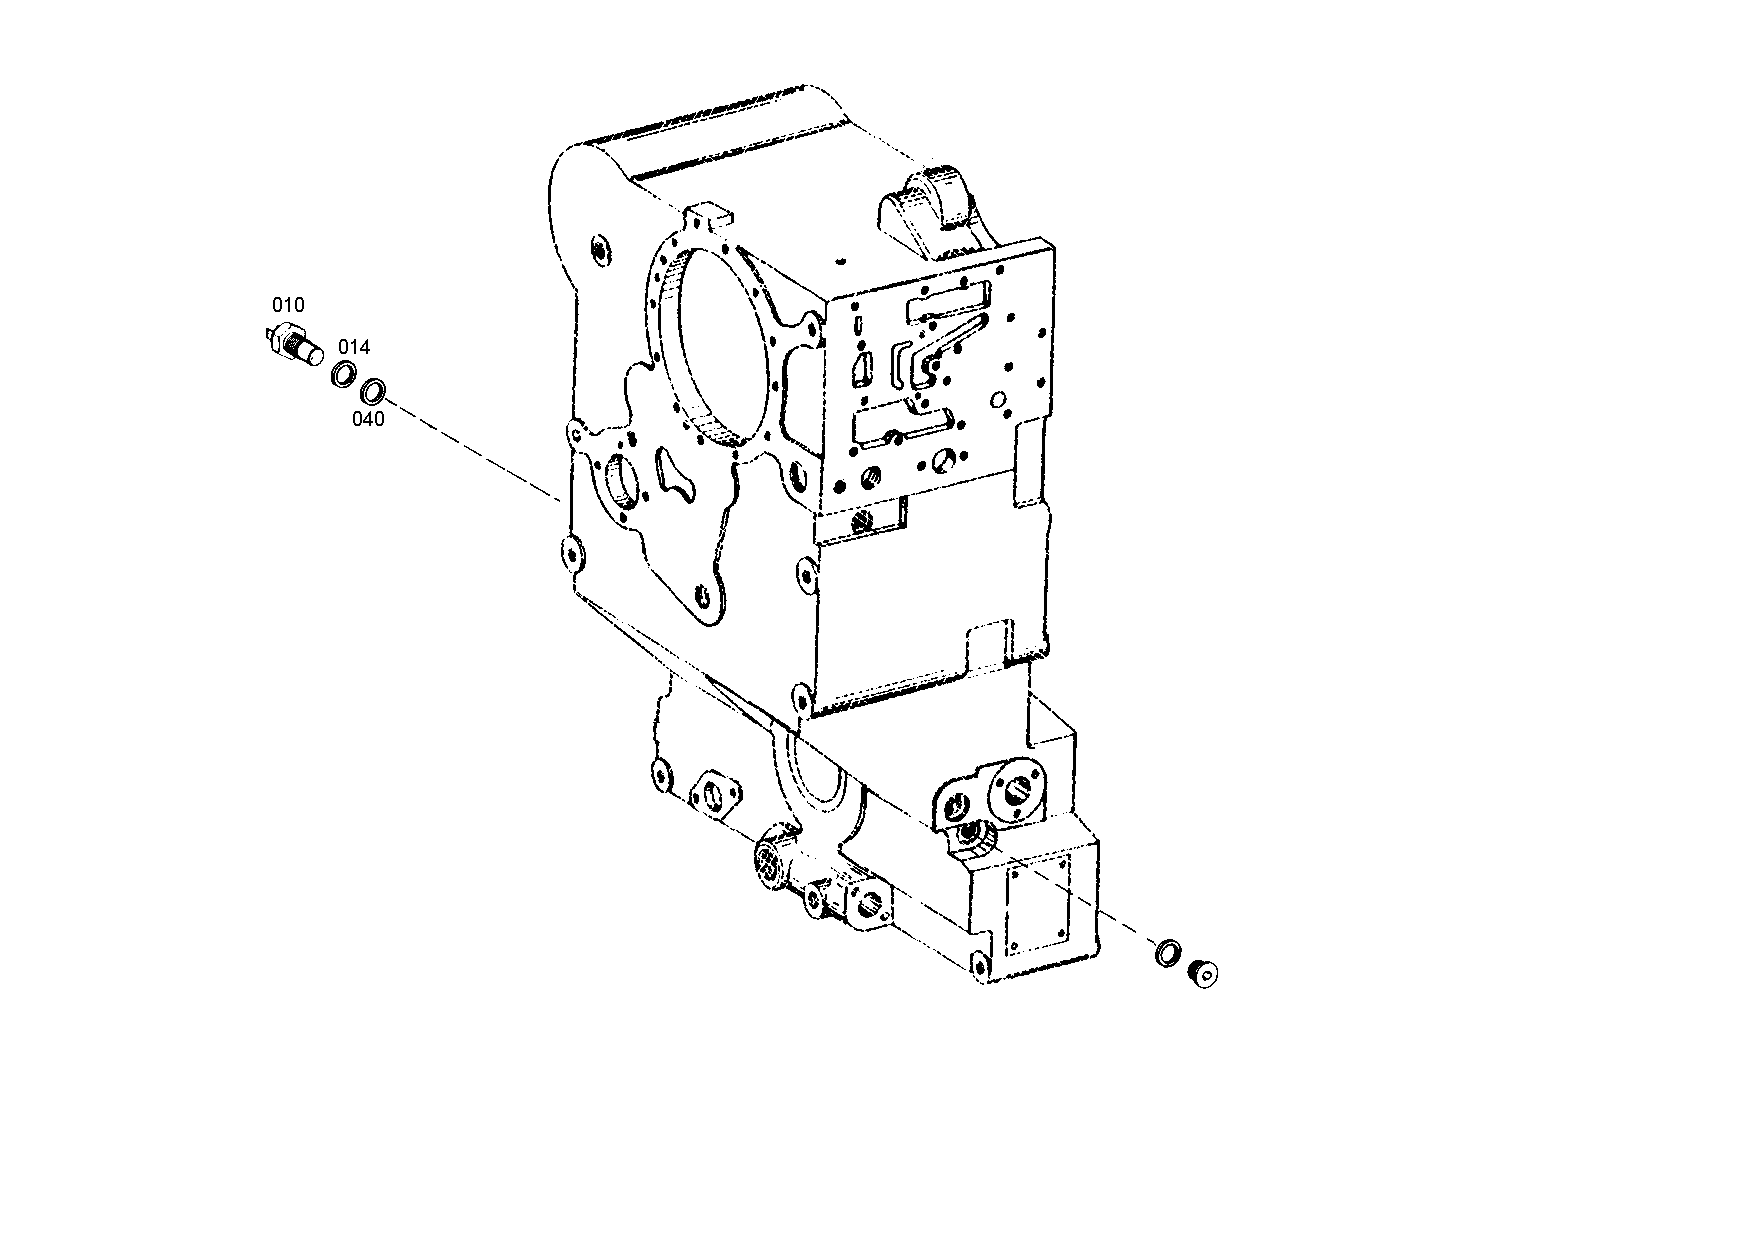 drawing for Manitowoc Crane Group Germany 01684054 - INDUCTIVE TRANSMITTER (figure 2)